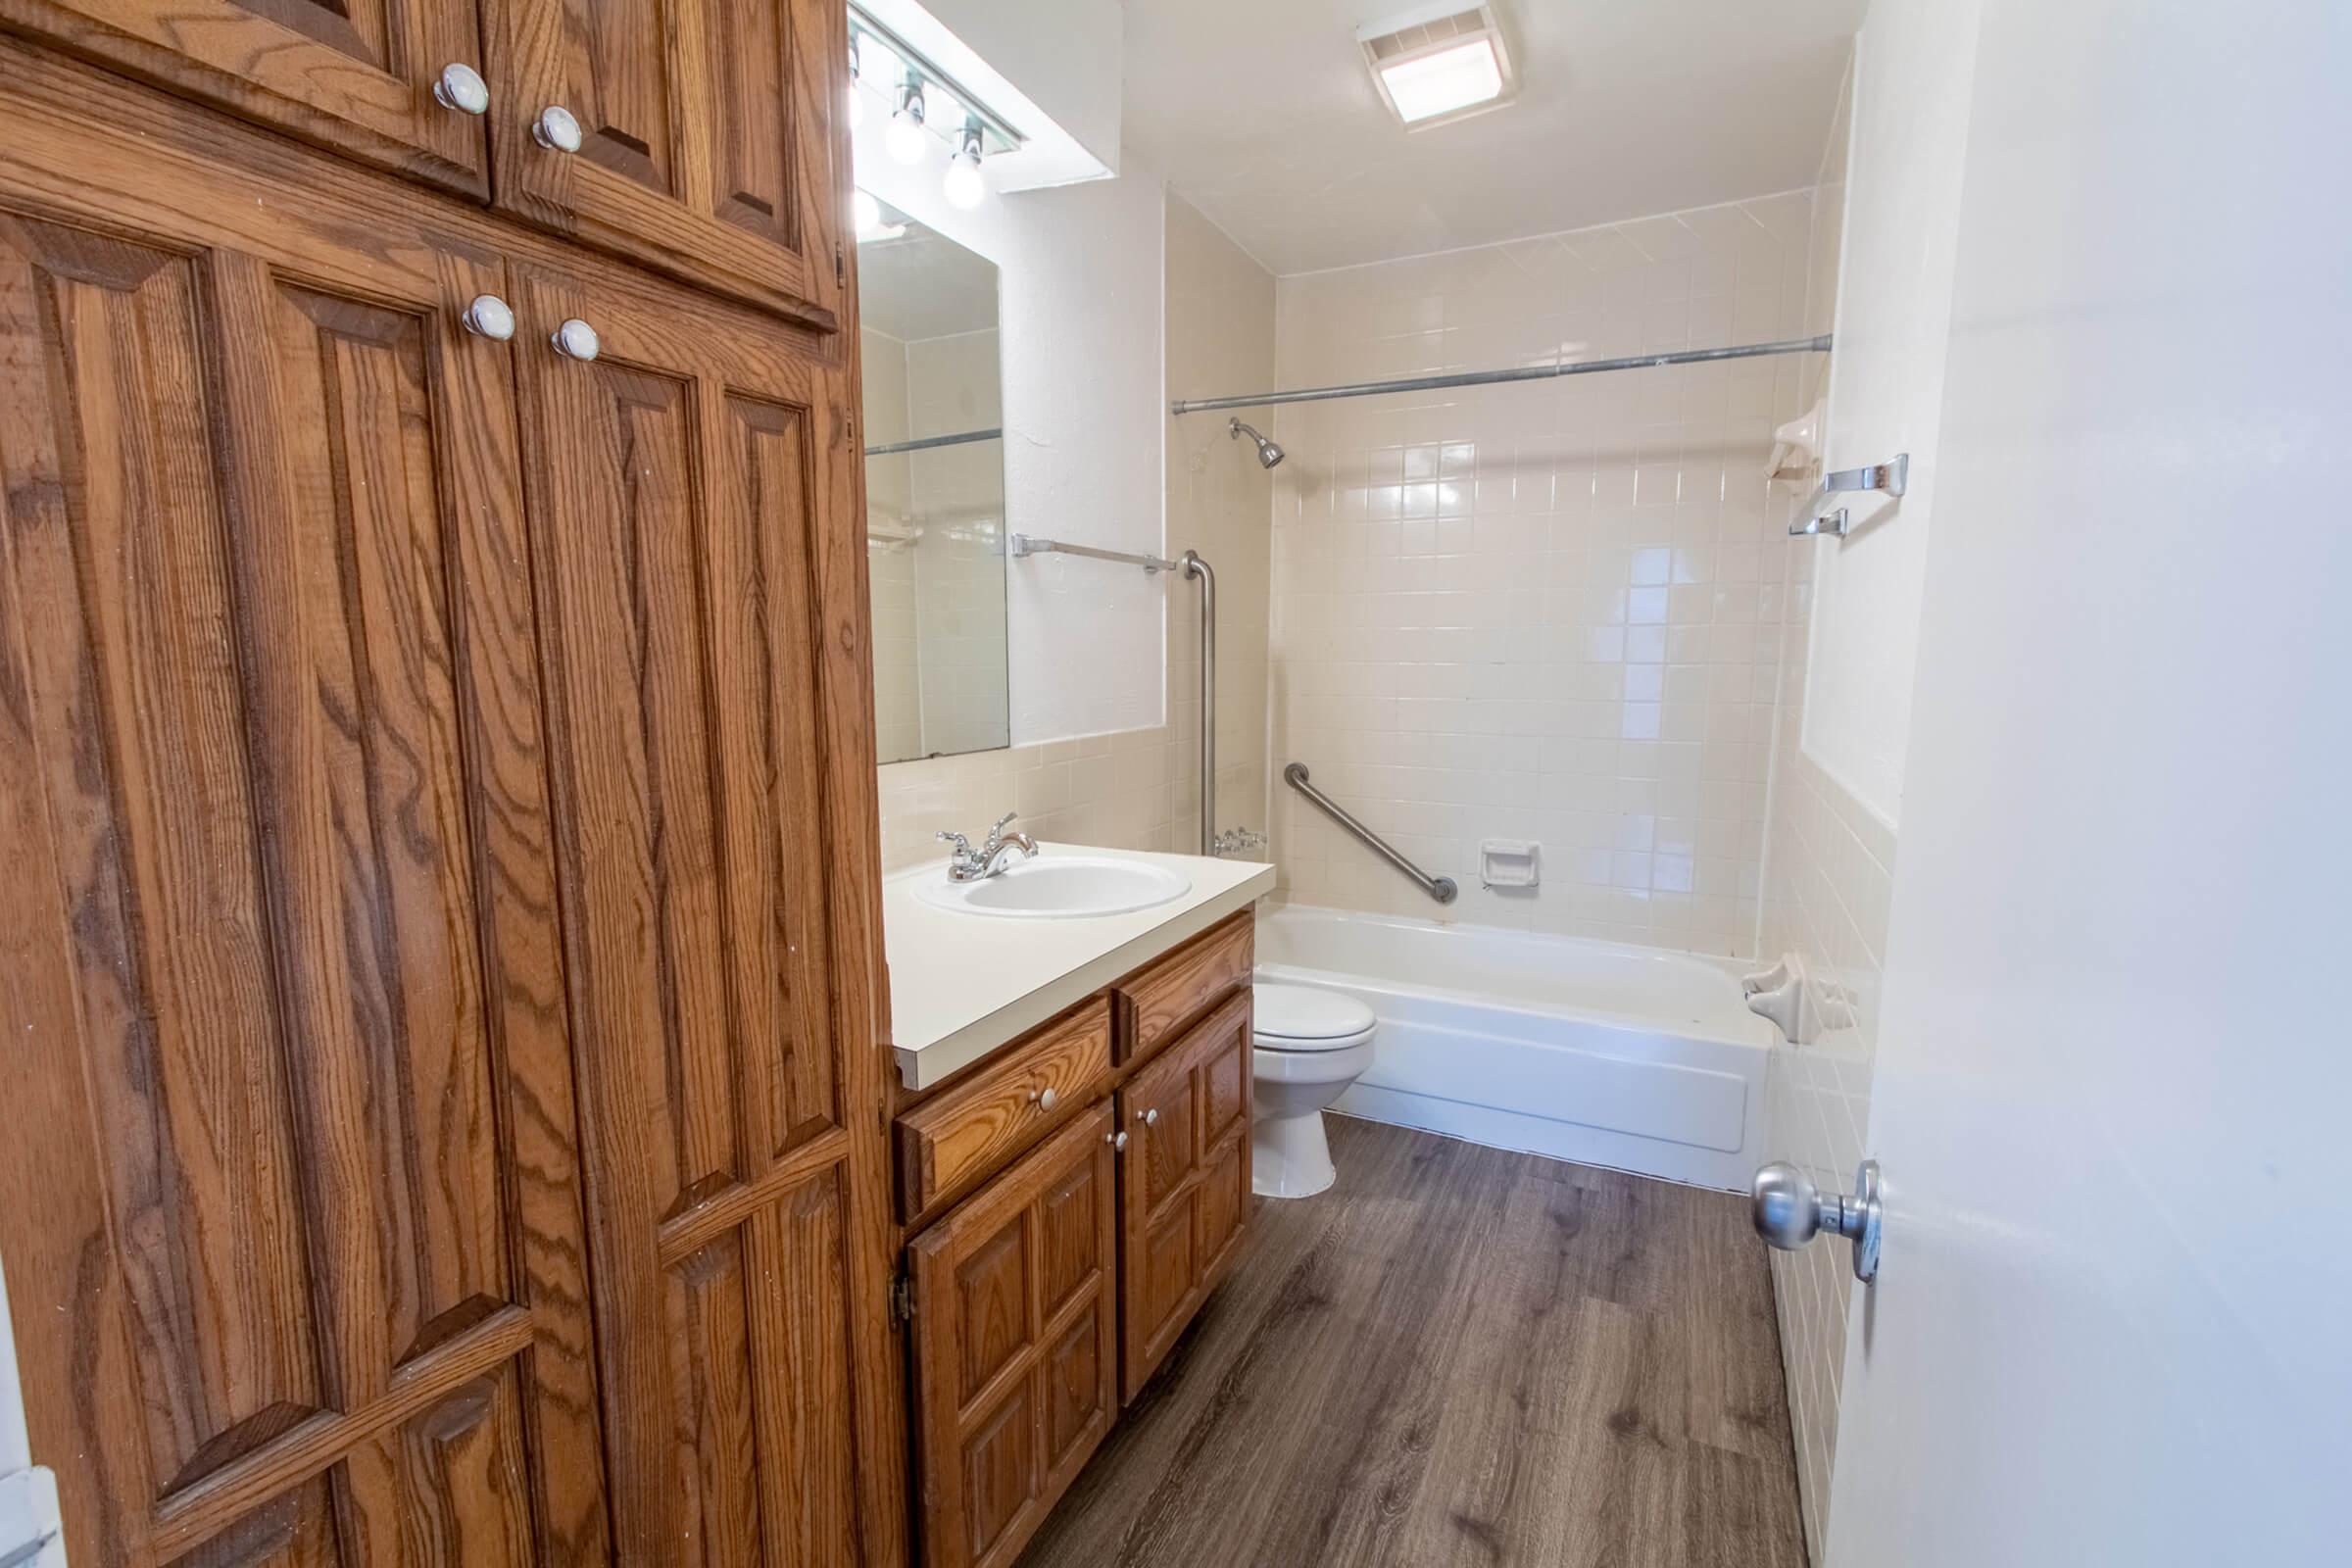 a large wooden cabinet next to a shower